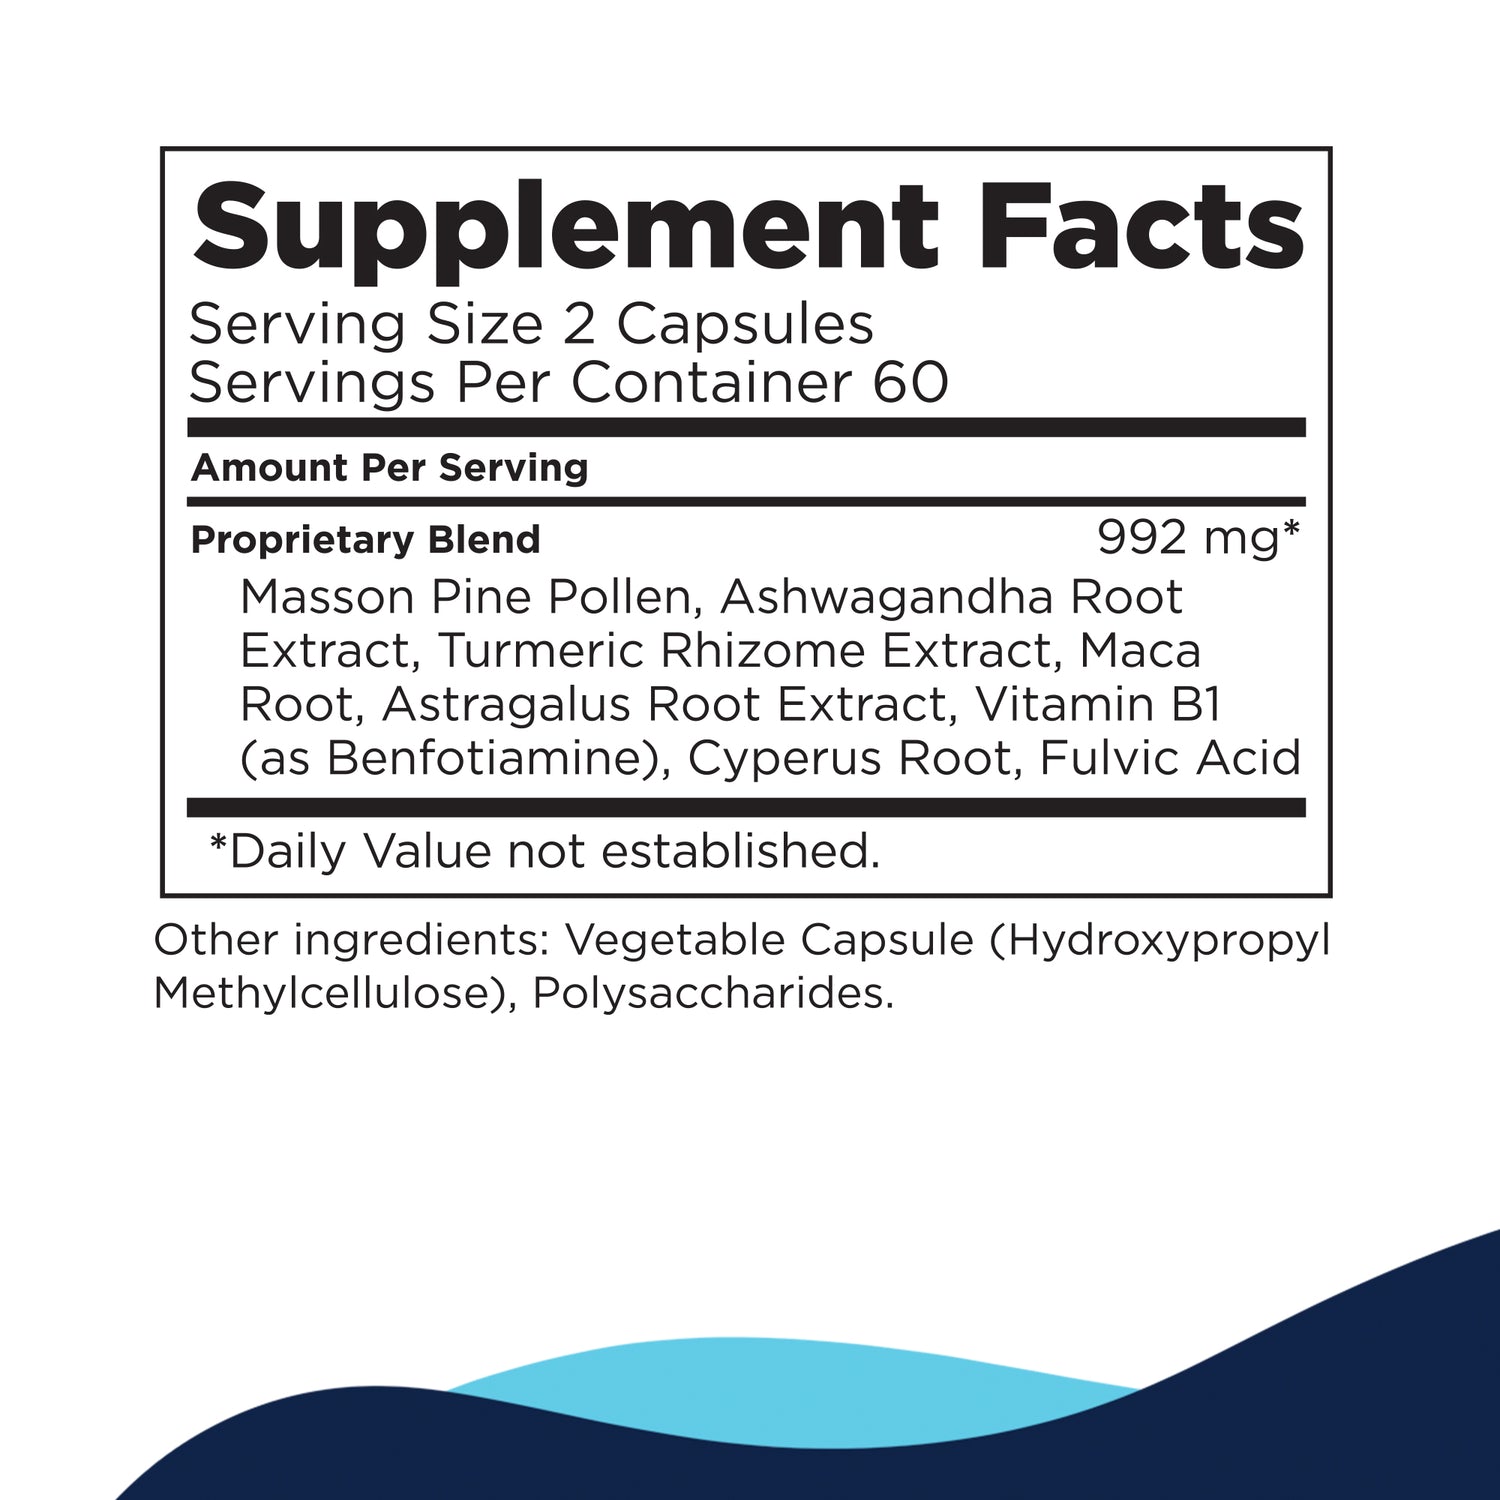 S-TRO Supplement Facts